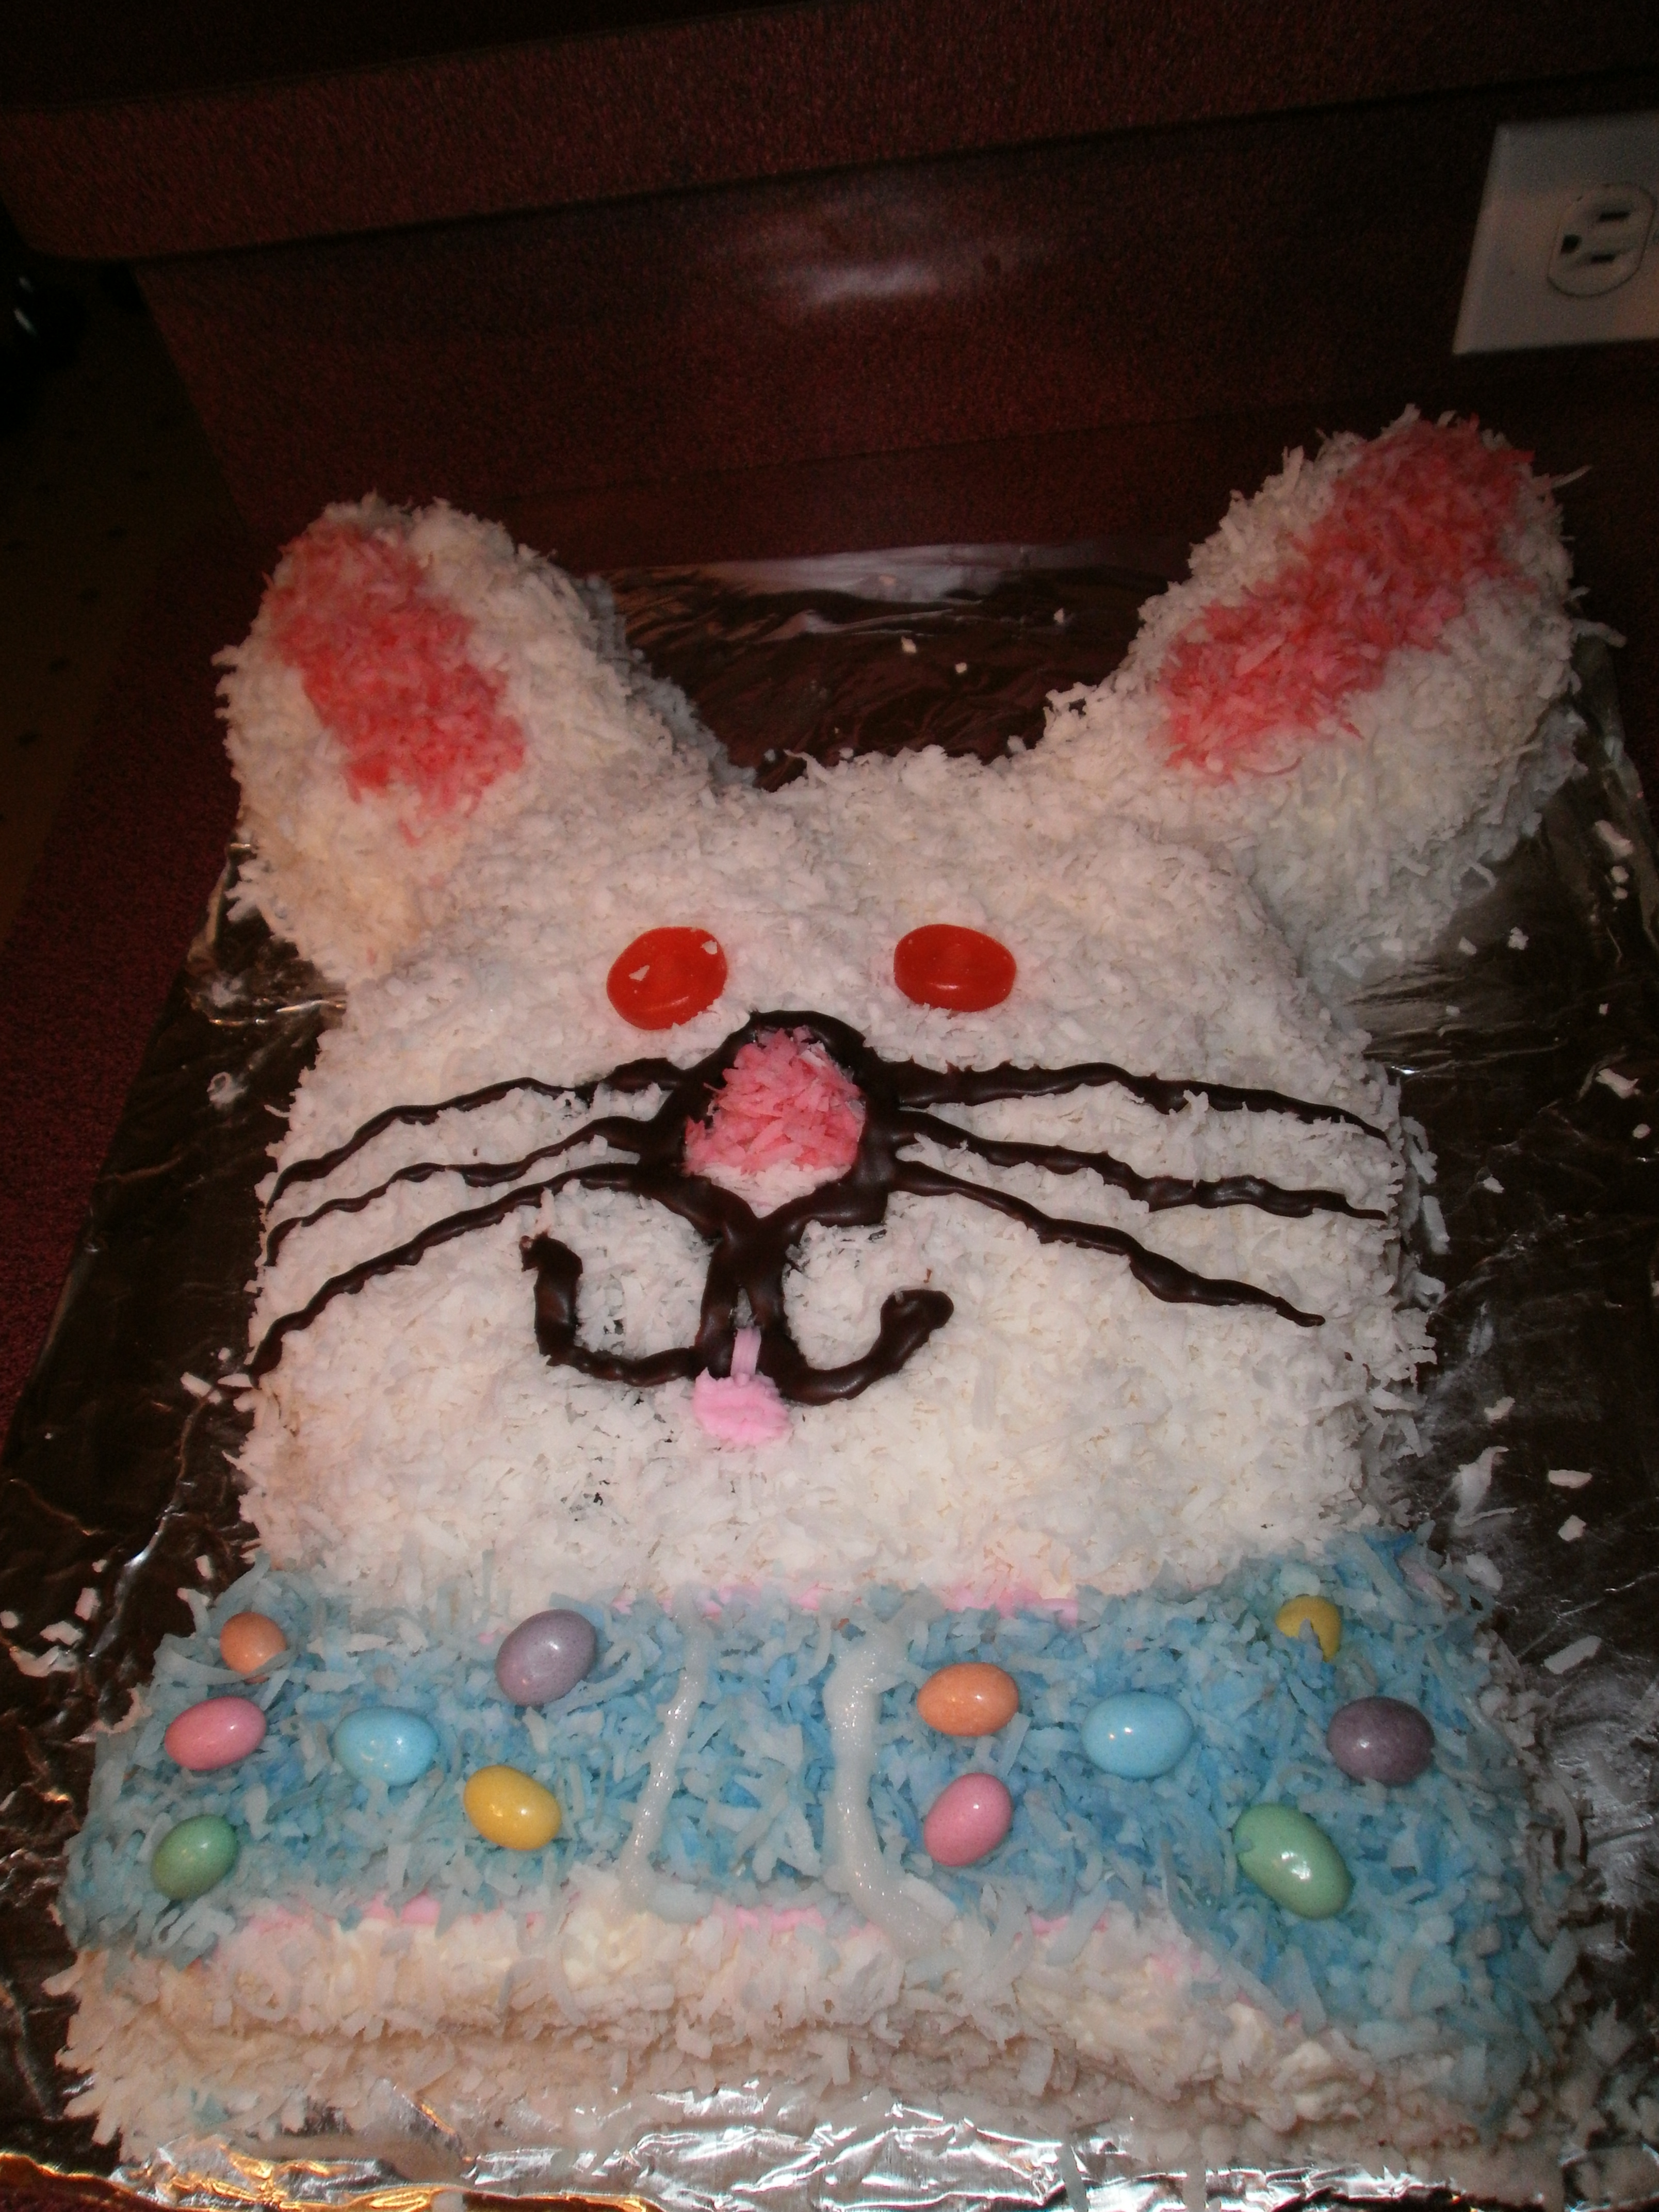 8 Cute Easter Bunny Cake Ideas | Our Baking Blog: Cake, Cookie & Dessert  Recipes by Wilton